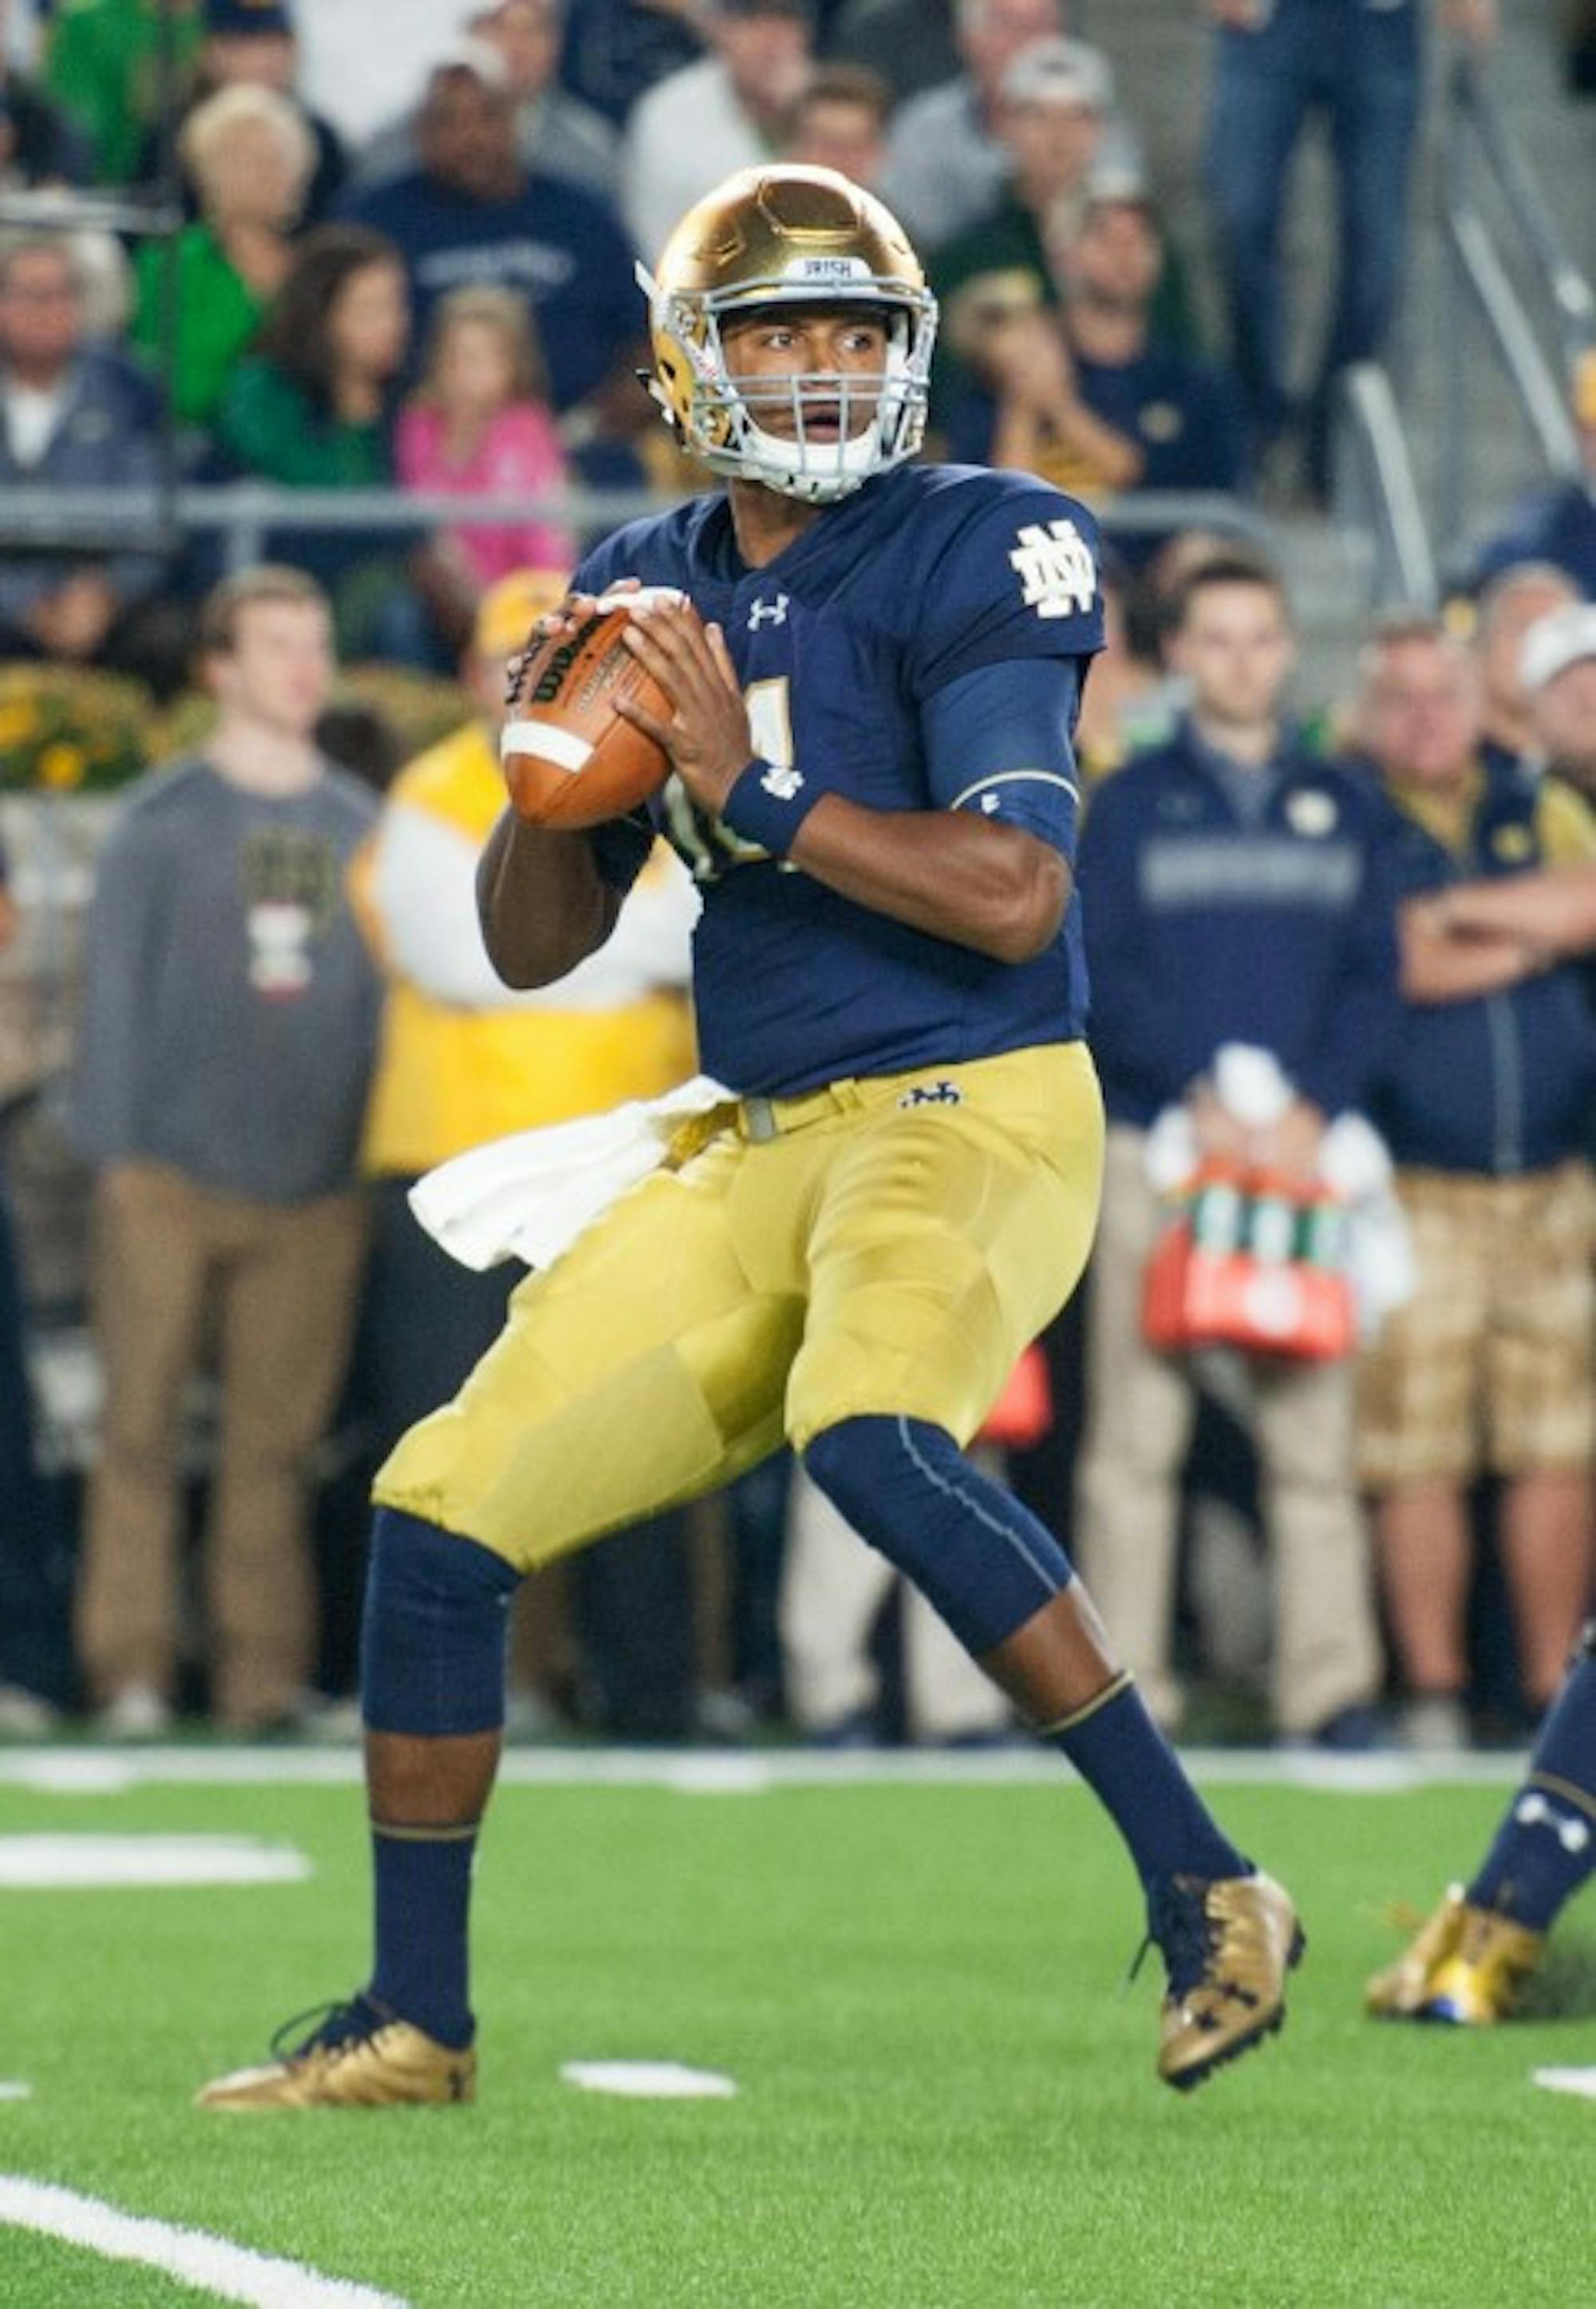 Irish junior quarterback DeShone Kizer drops back and loads to throw during Notre Dame’s 17-10 loss to Stanford at Notre Dame Stadium on Oct. 15.